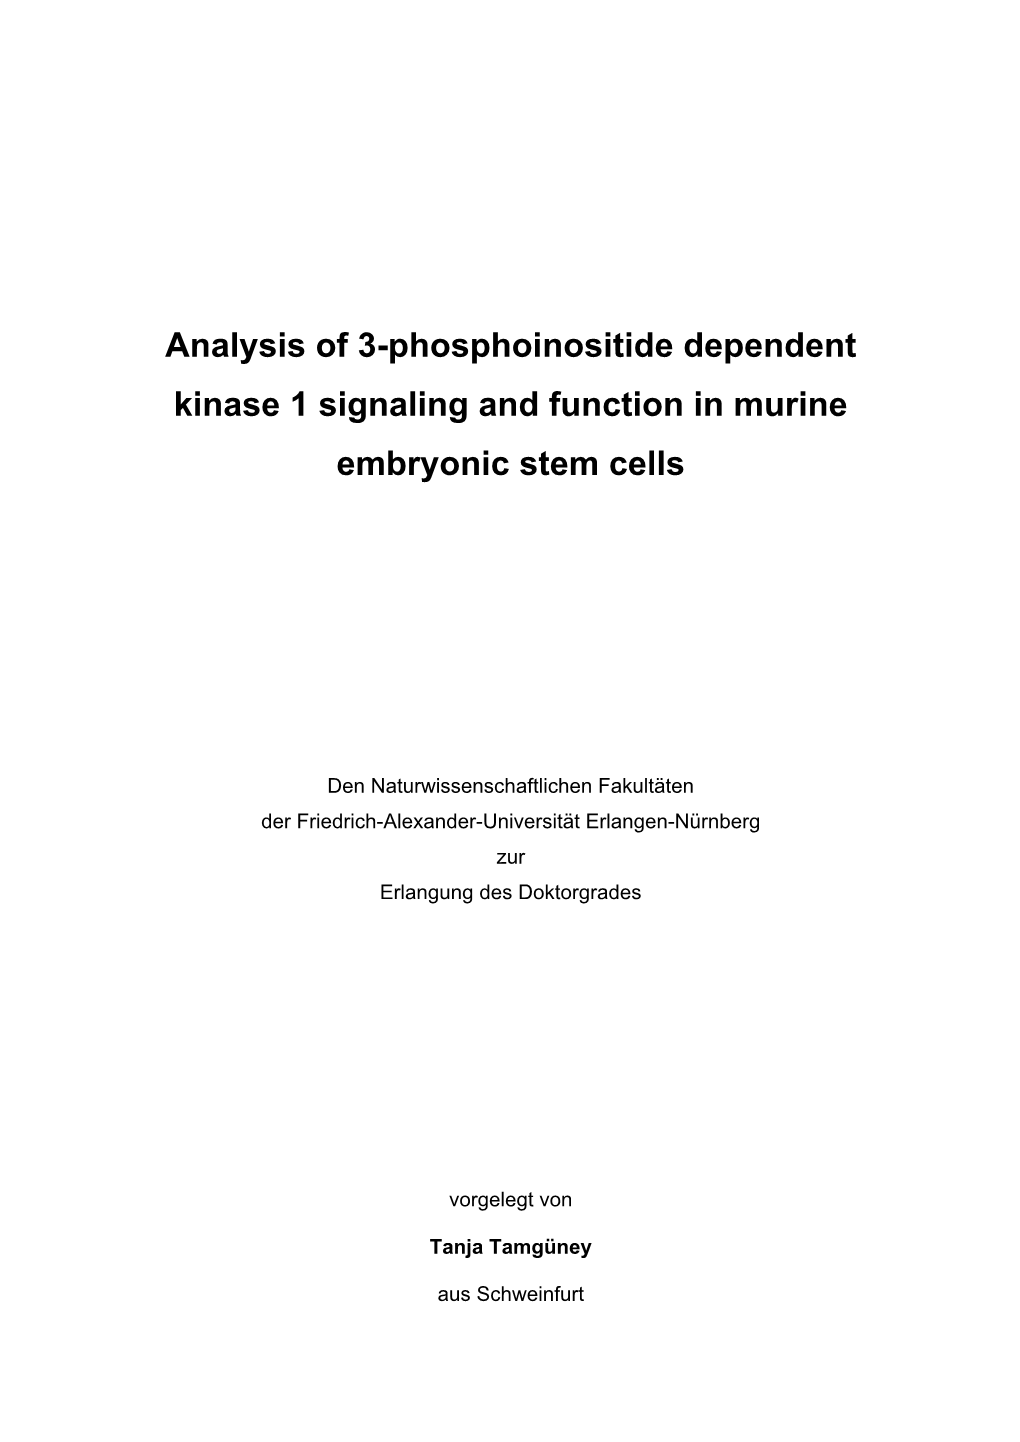 Analysis of 3-Phosphoinositide Dependent Kinase 1 Signaling and Function in Murine Embryonic Stem Cells